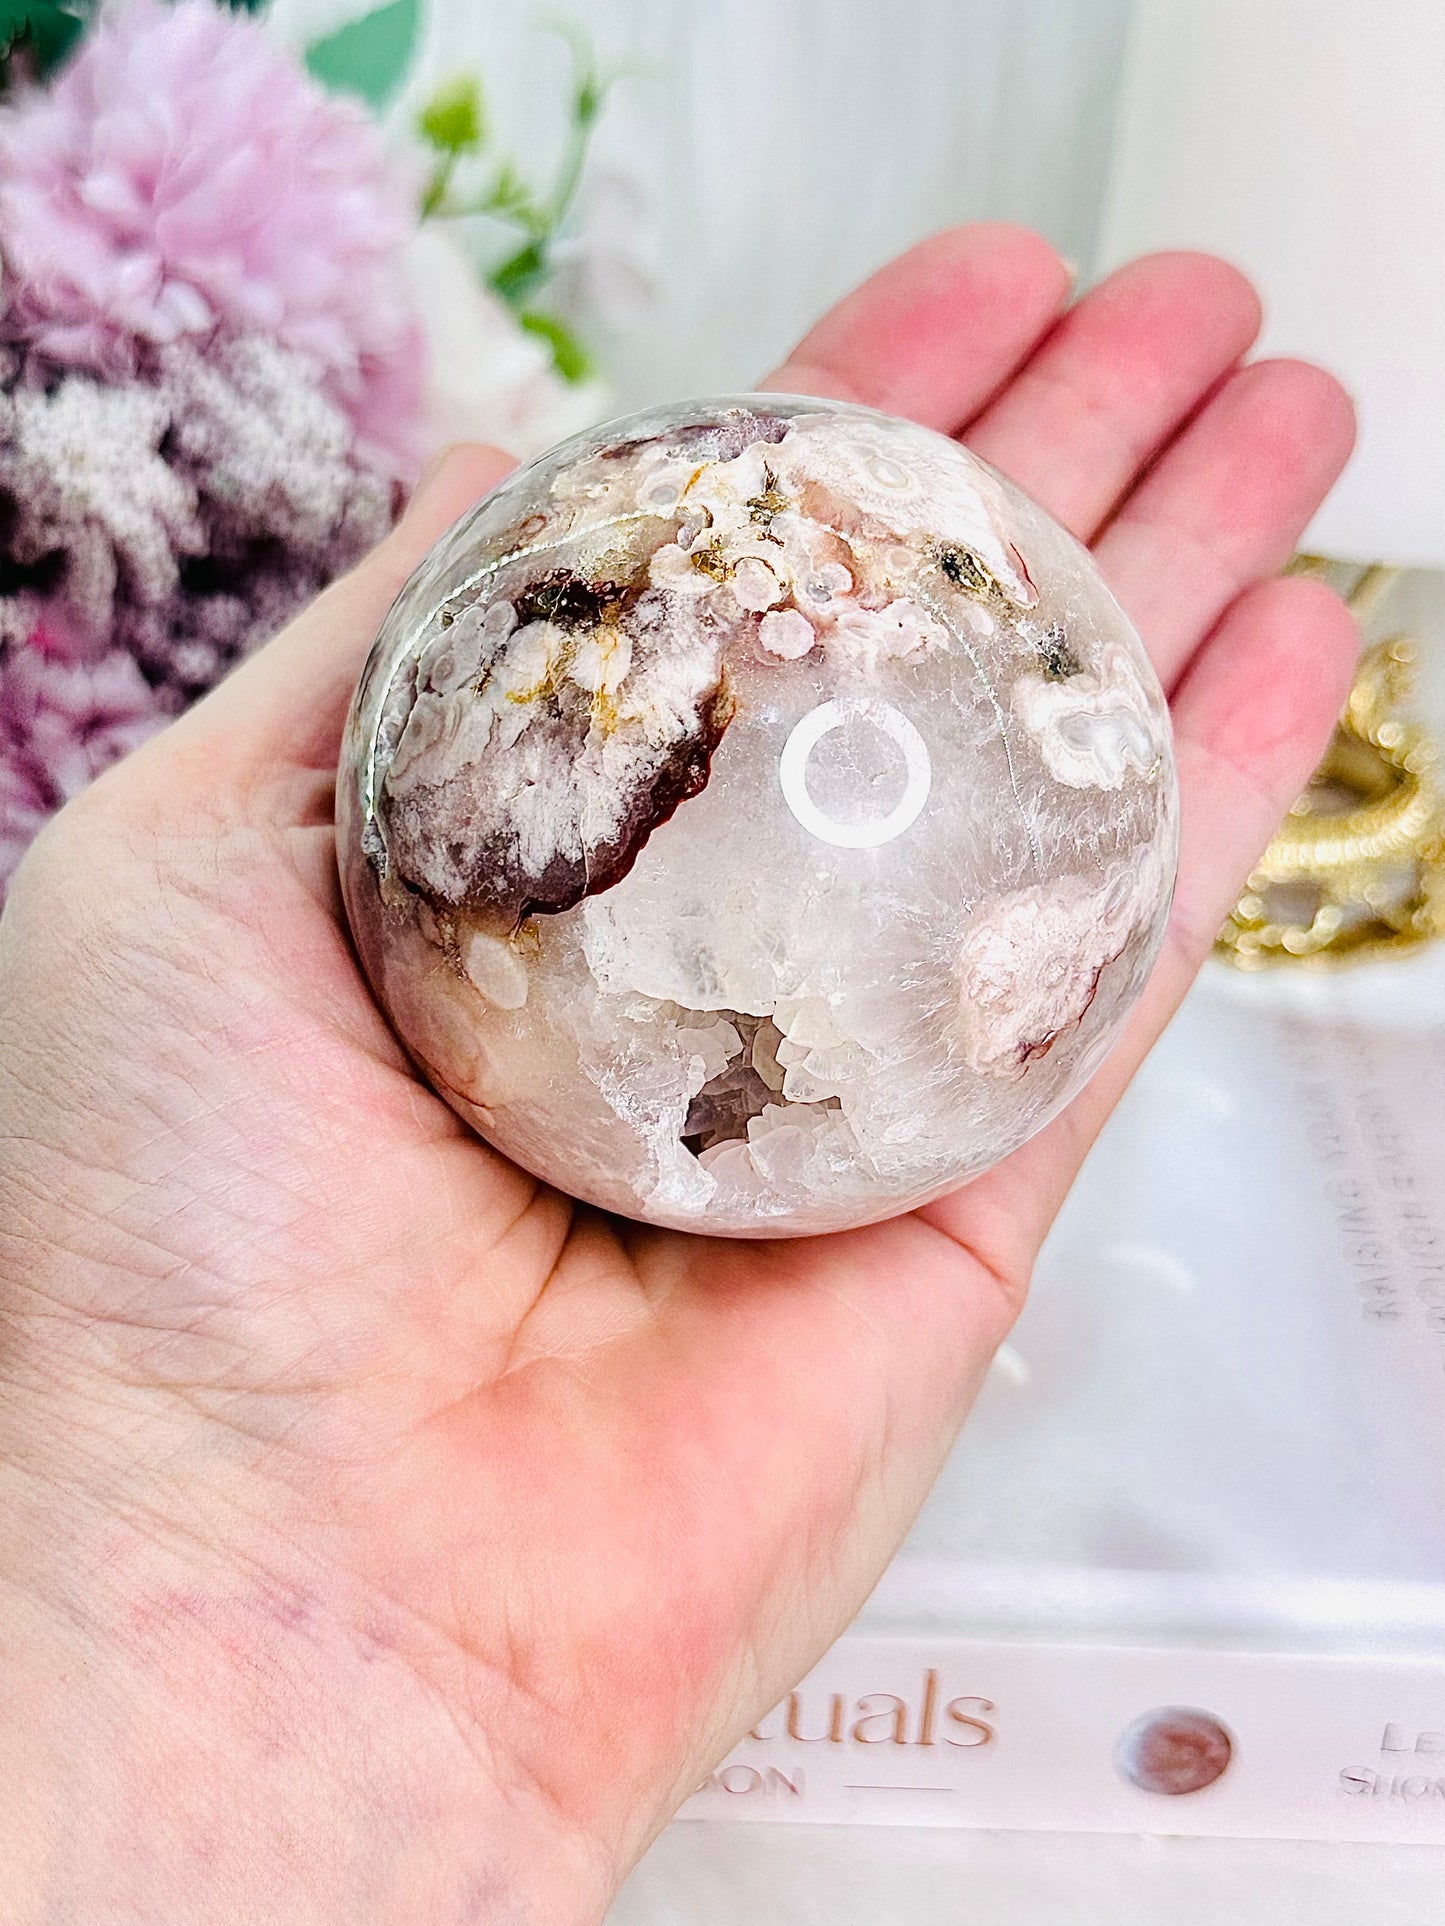 Absolutely Divine 395gram Druzy Flower Agate Stunning Sphere From Madagascar ~Comes on Silver Stand (glass stand in pic is display only)